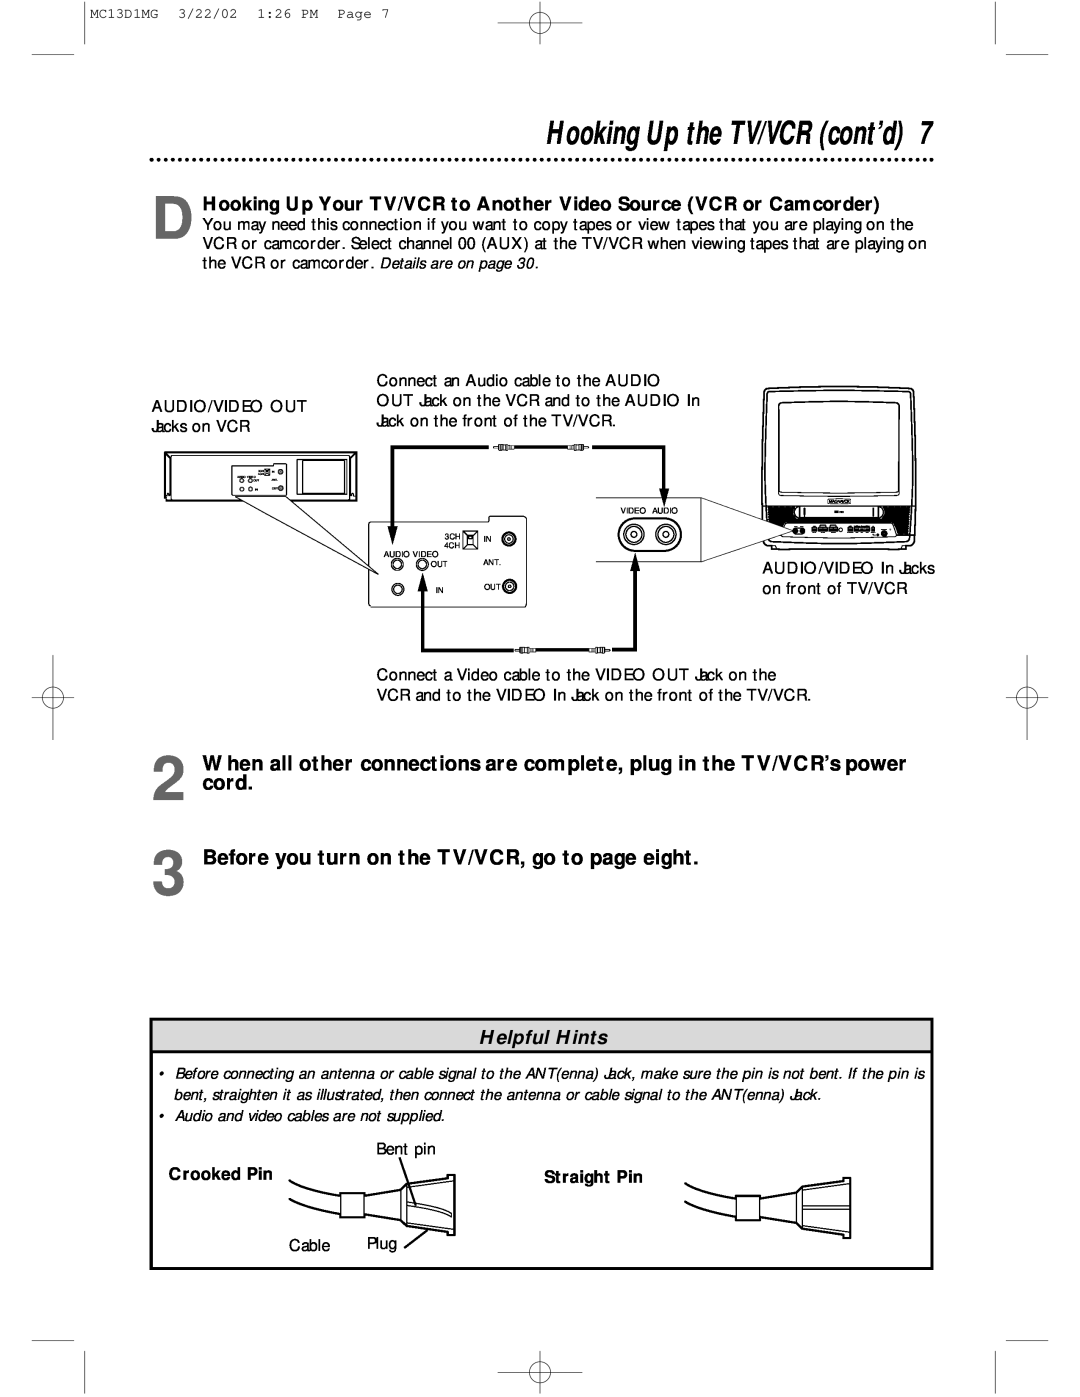 Magnavox MC13D1MG, MC19D1MG Hooking Up the TV/VCR cont’d, Before you turn on the TV/VCR, go to page eight, Helpful Hints 